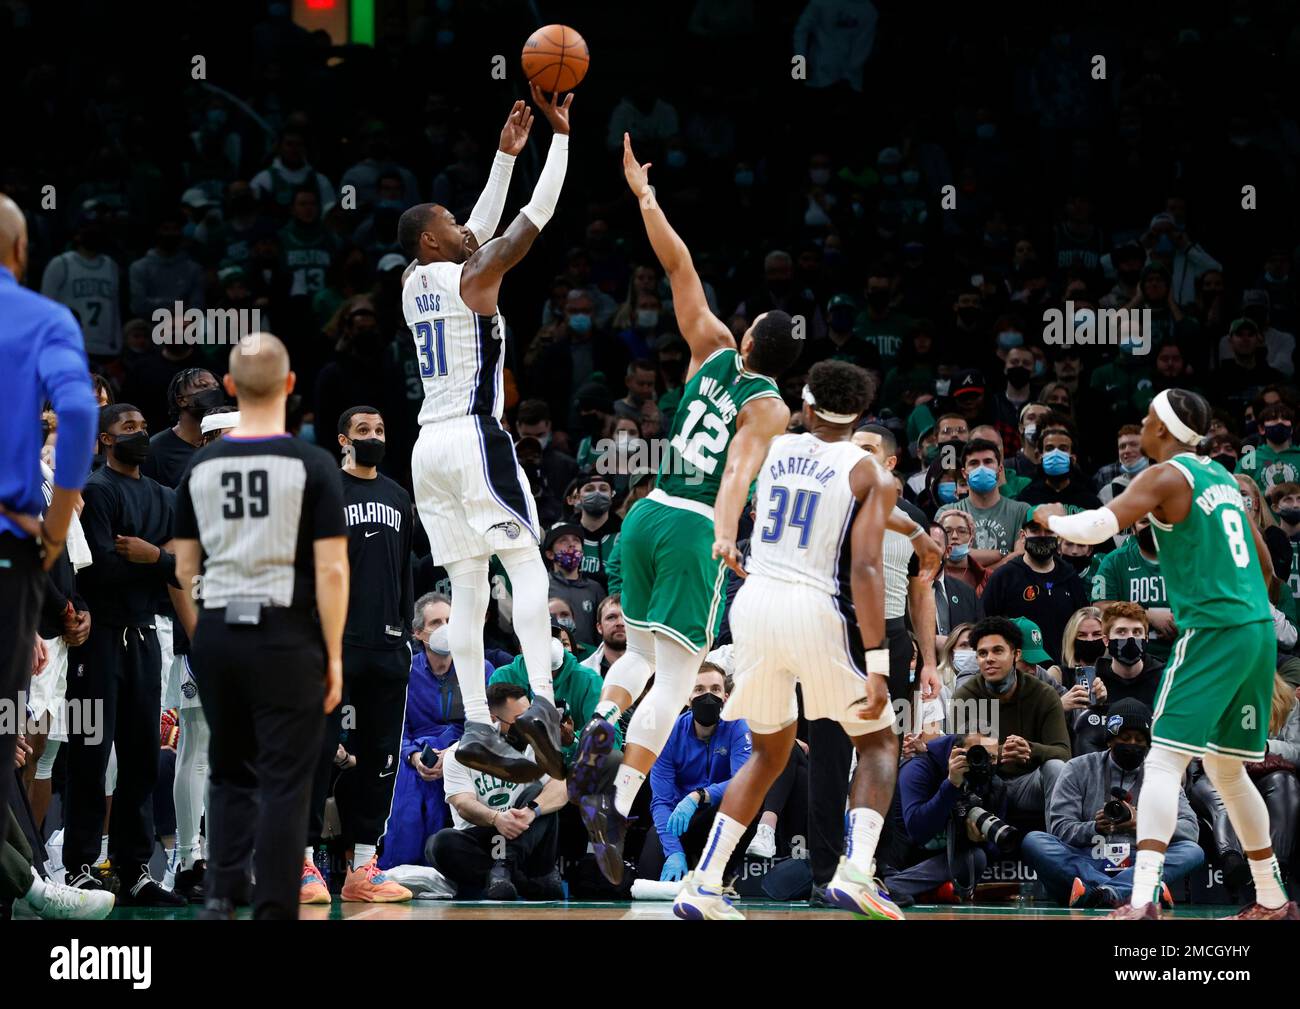 Orlando Magic guard Terrence Ross (31) is fouled by Boston Celtics forward Grant Williams (12) as he shoots a three-point shot during overtime of an NBA basketball game, Sunday, Jan